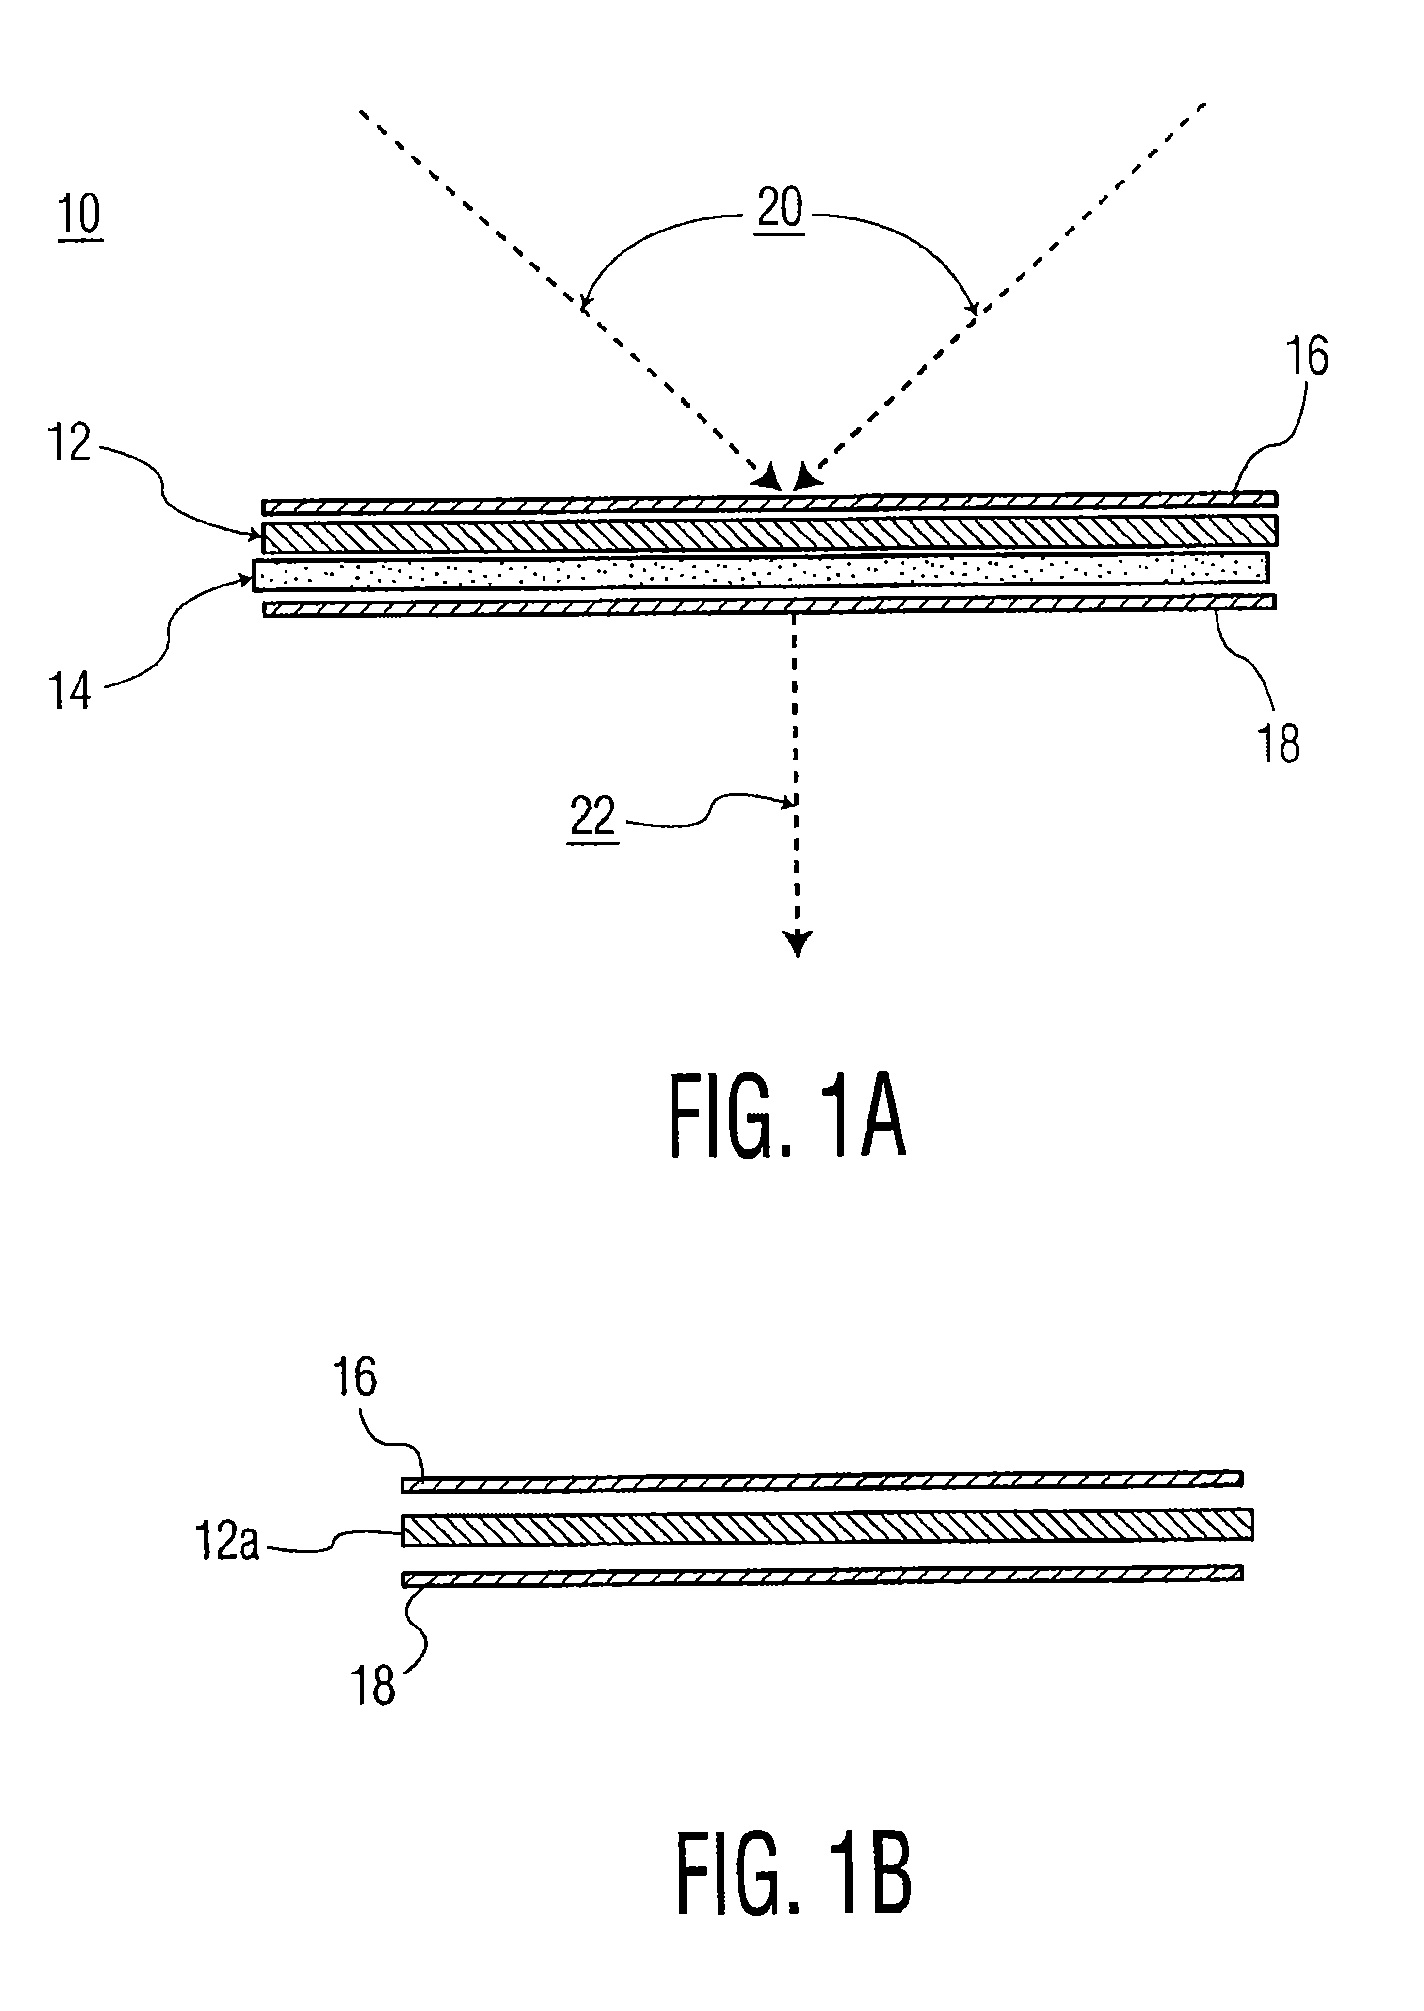 Transmissive diffuser with a layer of polytetrafluoroethylene on the output surface for use with an on-orbit radiometric calibration